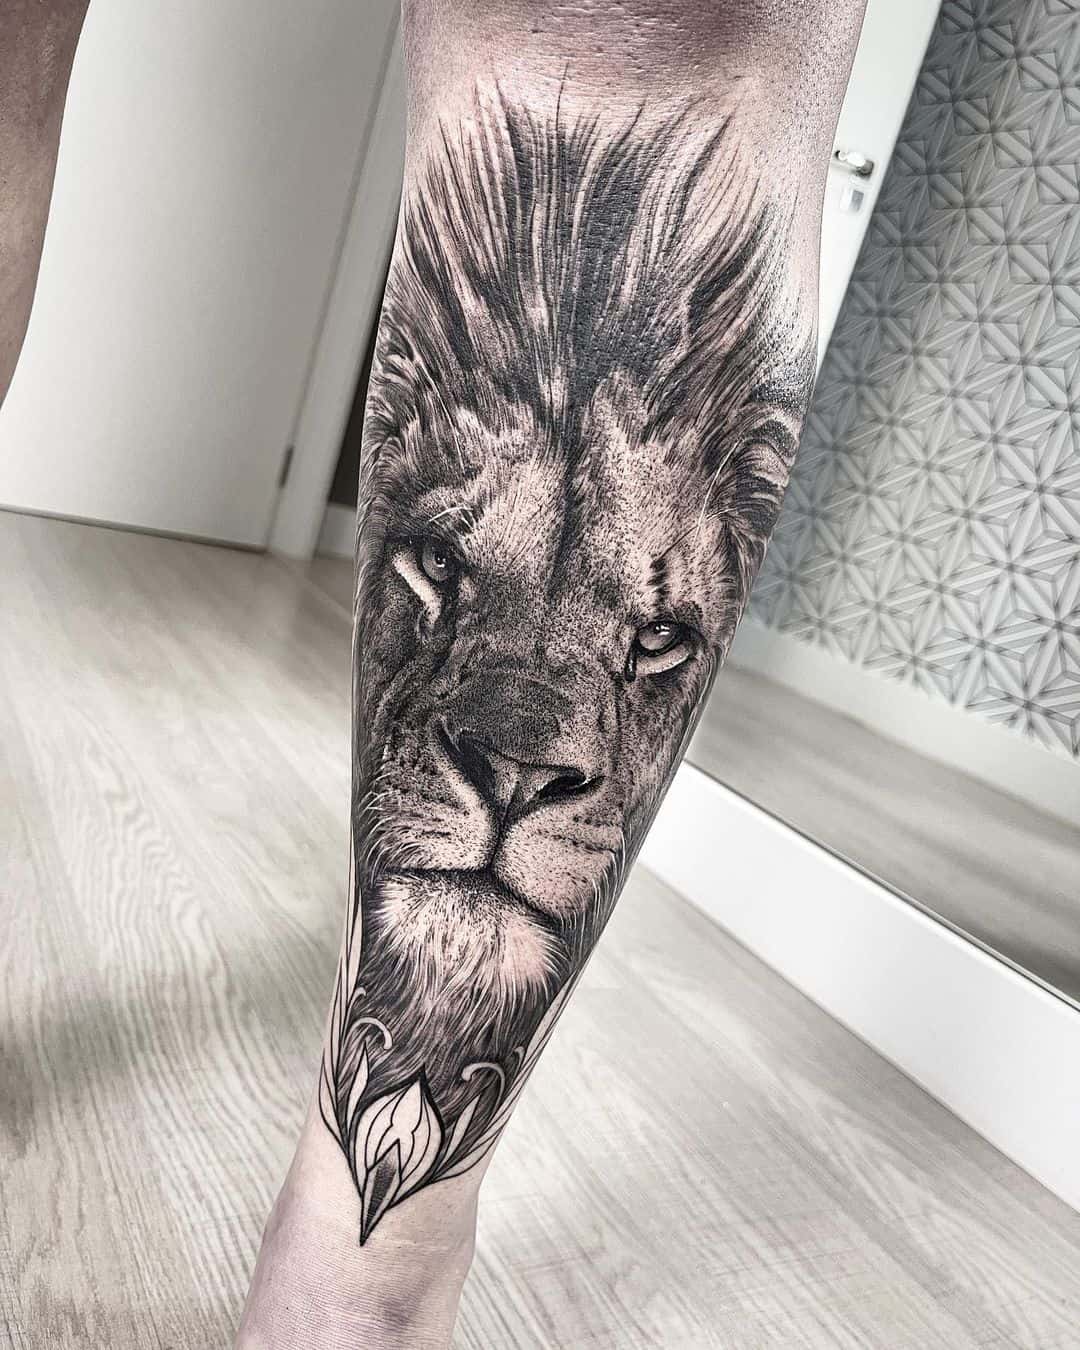 25 Lion Tattoos To Make You Feel Fearless